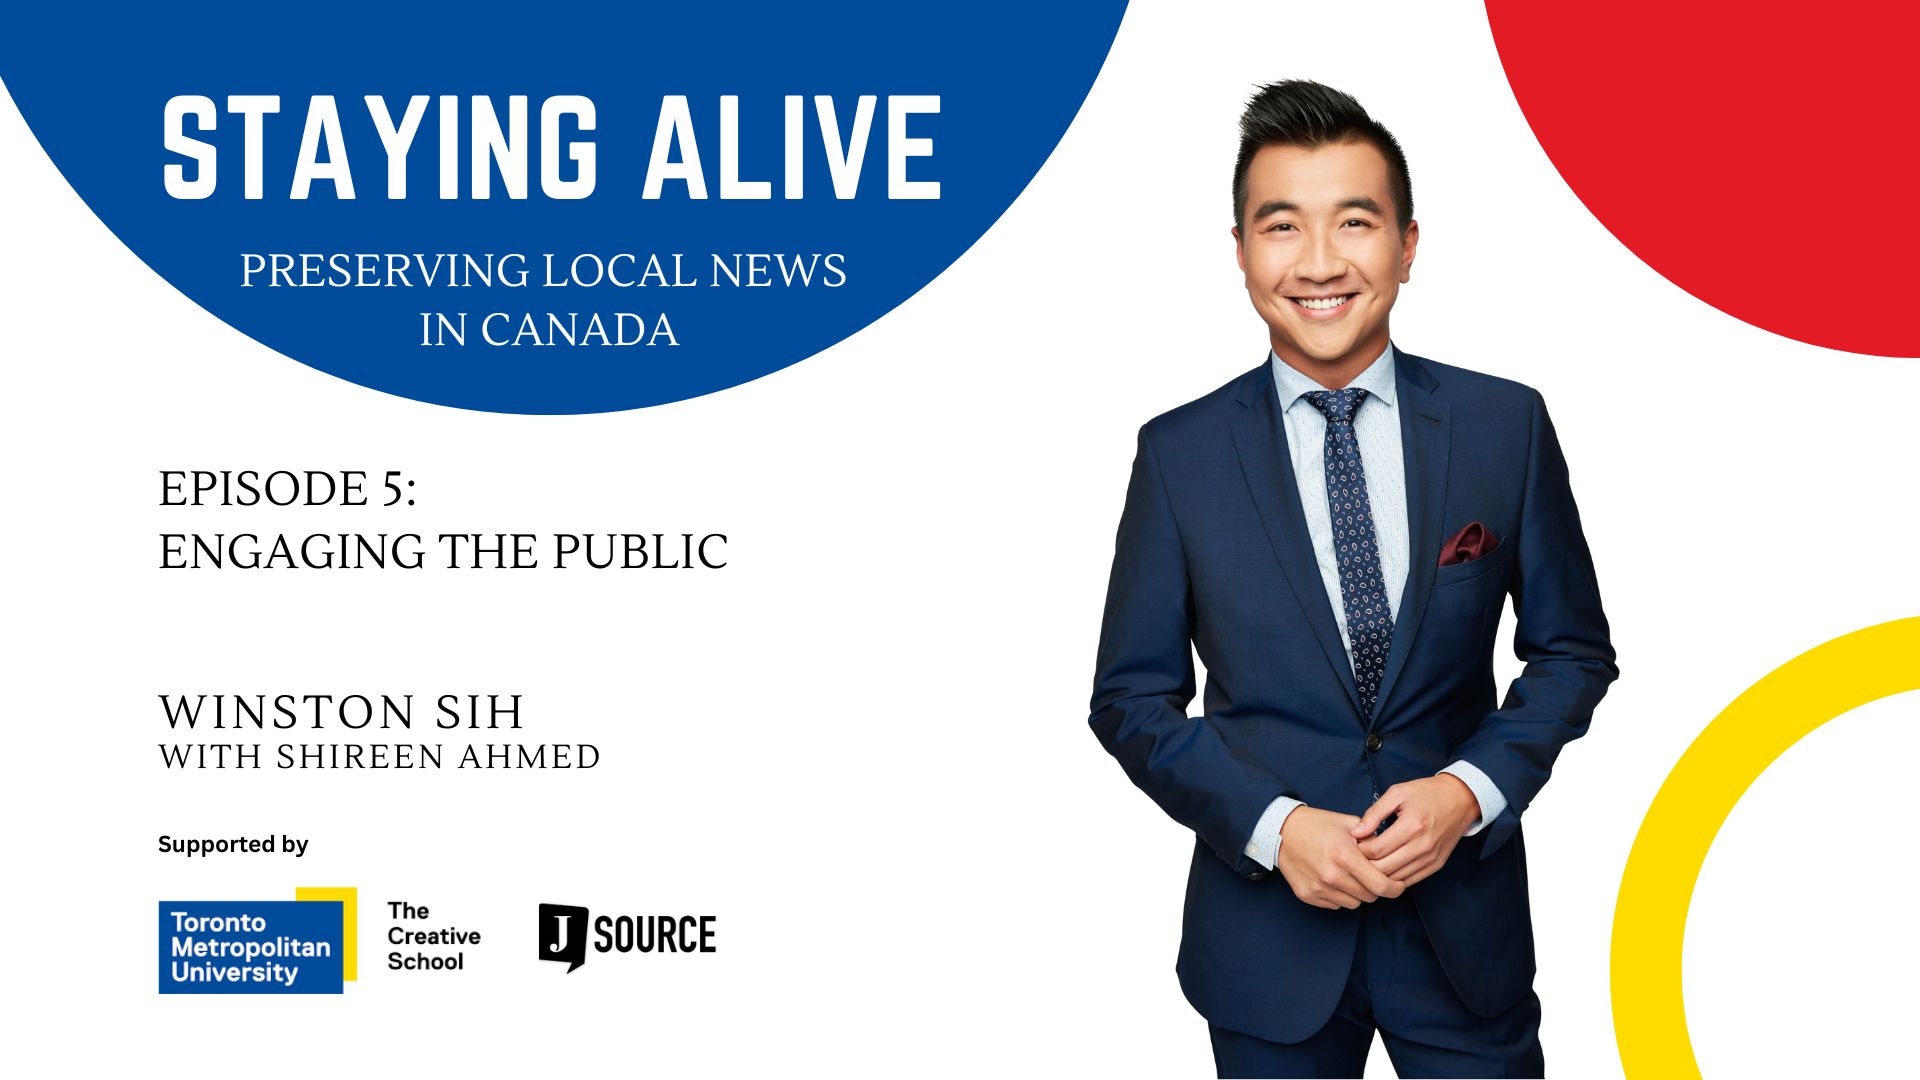 Staying Alive Preserving Local News in Canada
Episode 5
Engaging the public
Winston Sih with Shireen Ahmed
 Supported by the Creative School at Toronto Metropolitan University and J-Source